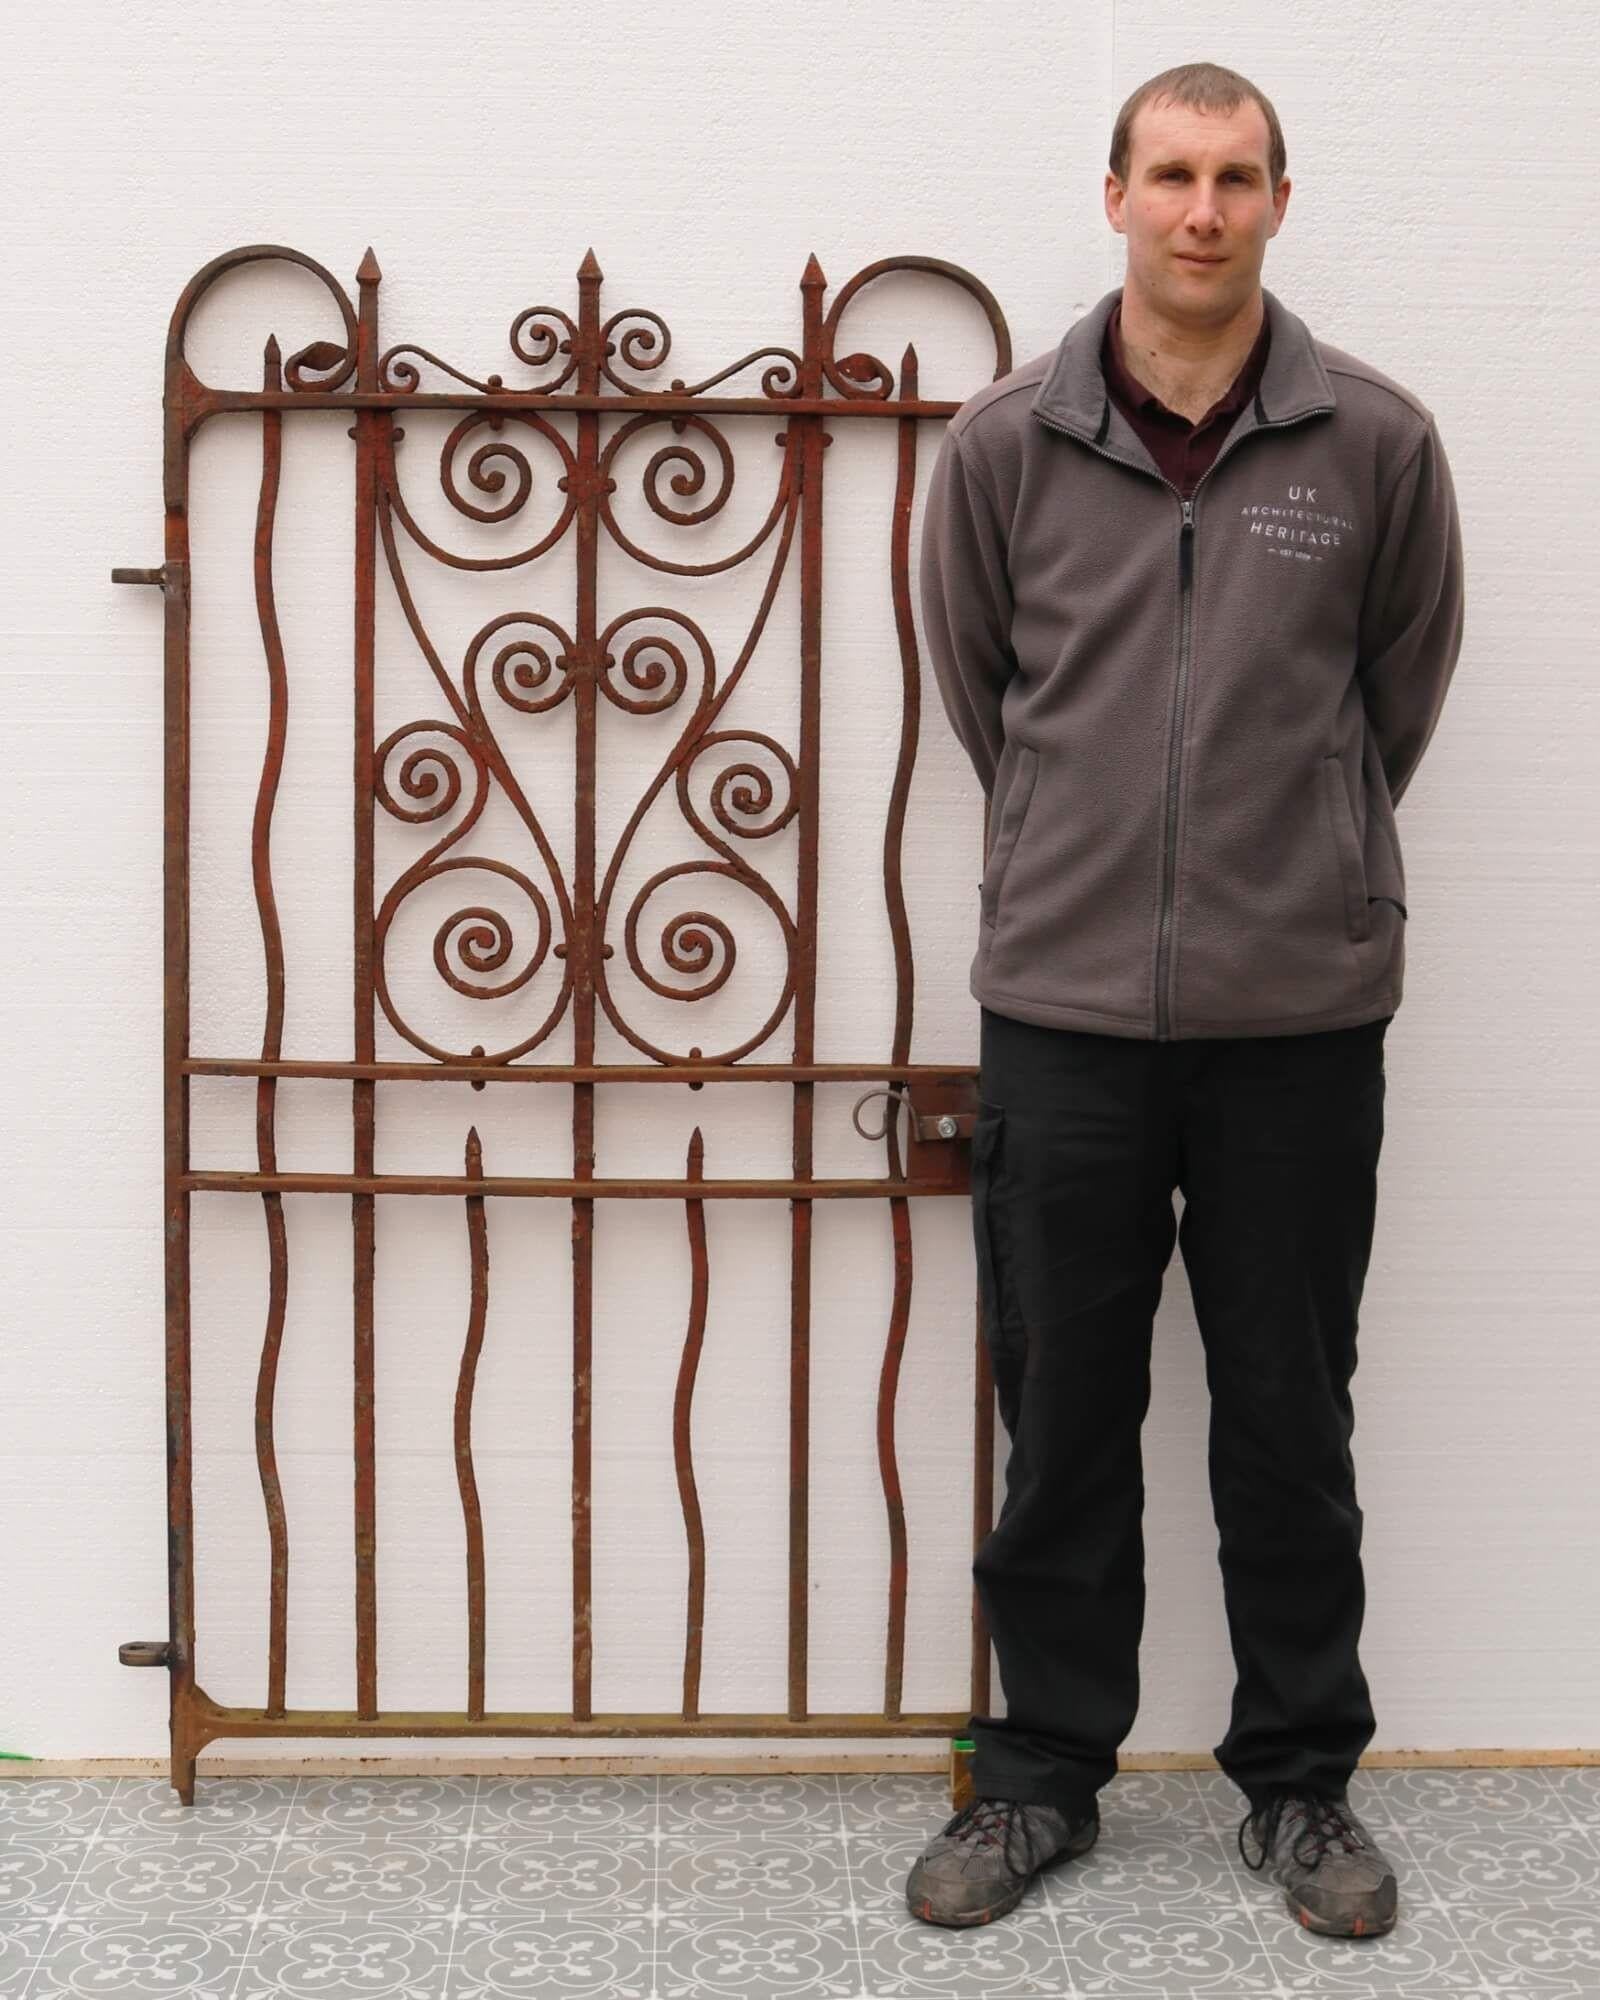 A strong and sturdy Victorian wrought iron pedestrian gate of very heavy construction. Over a century old, it dates from 1900 and features an unusual design of undulating vertical bars around a central framework of ornate scrolls, bringing both